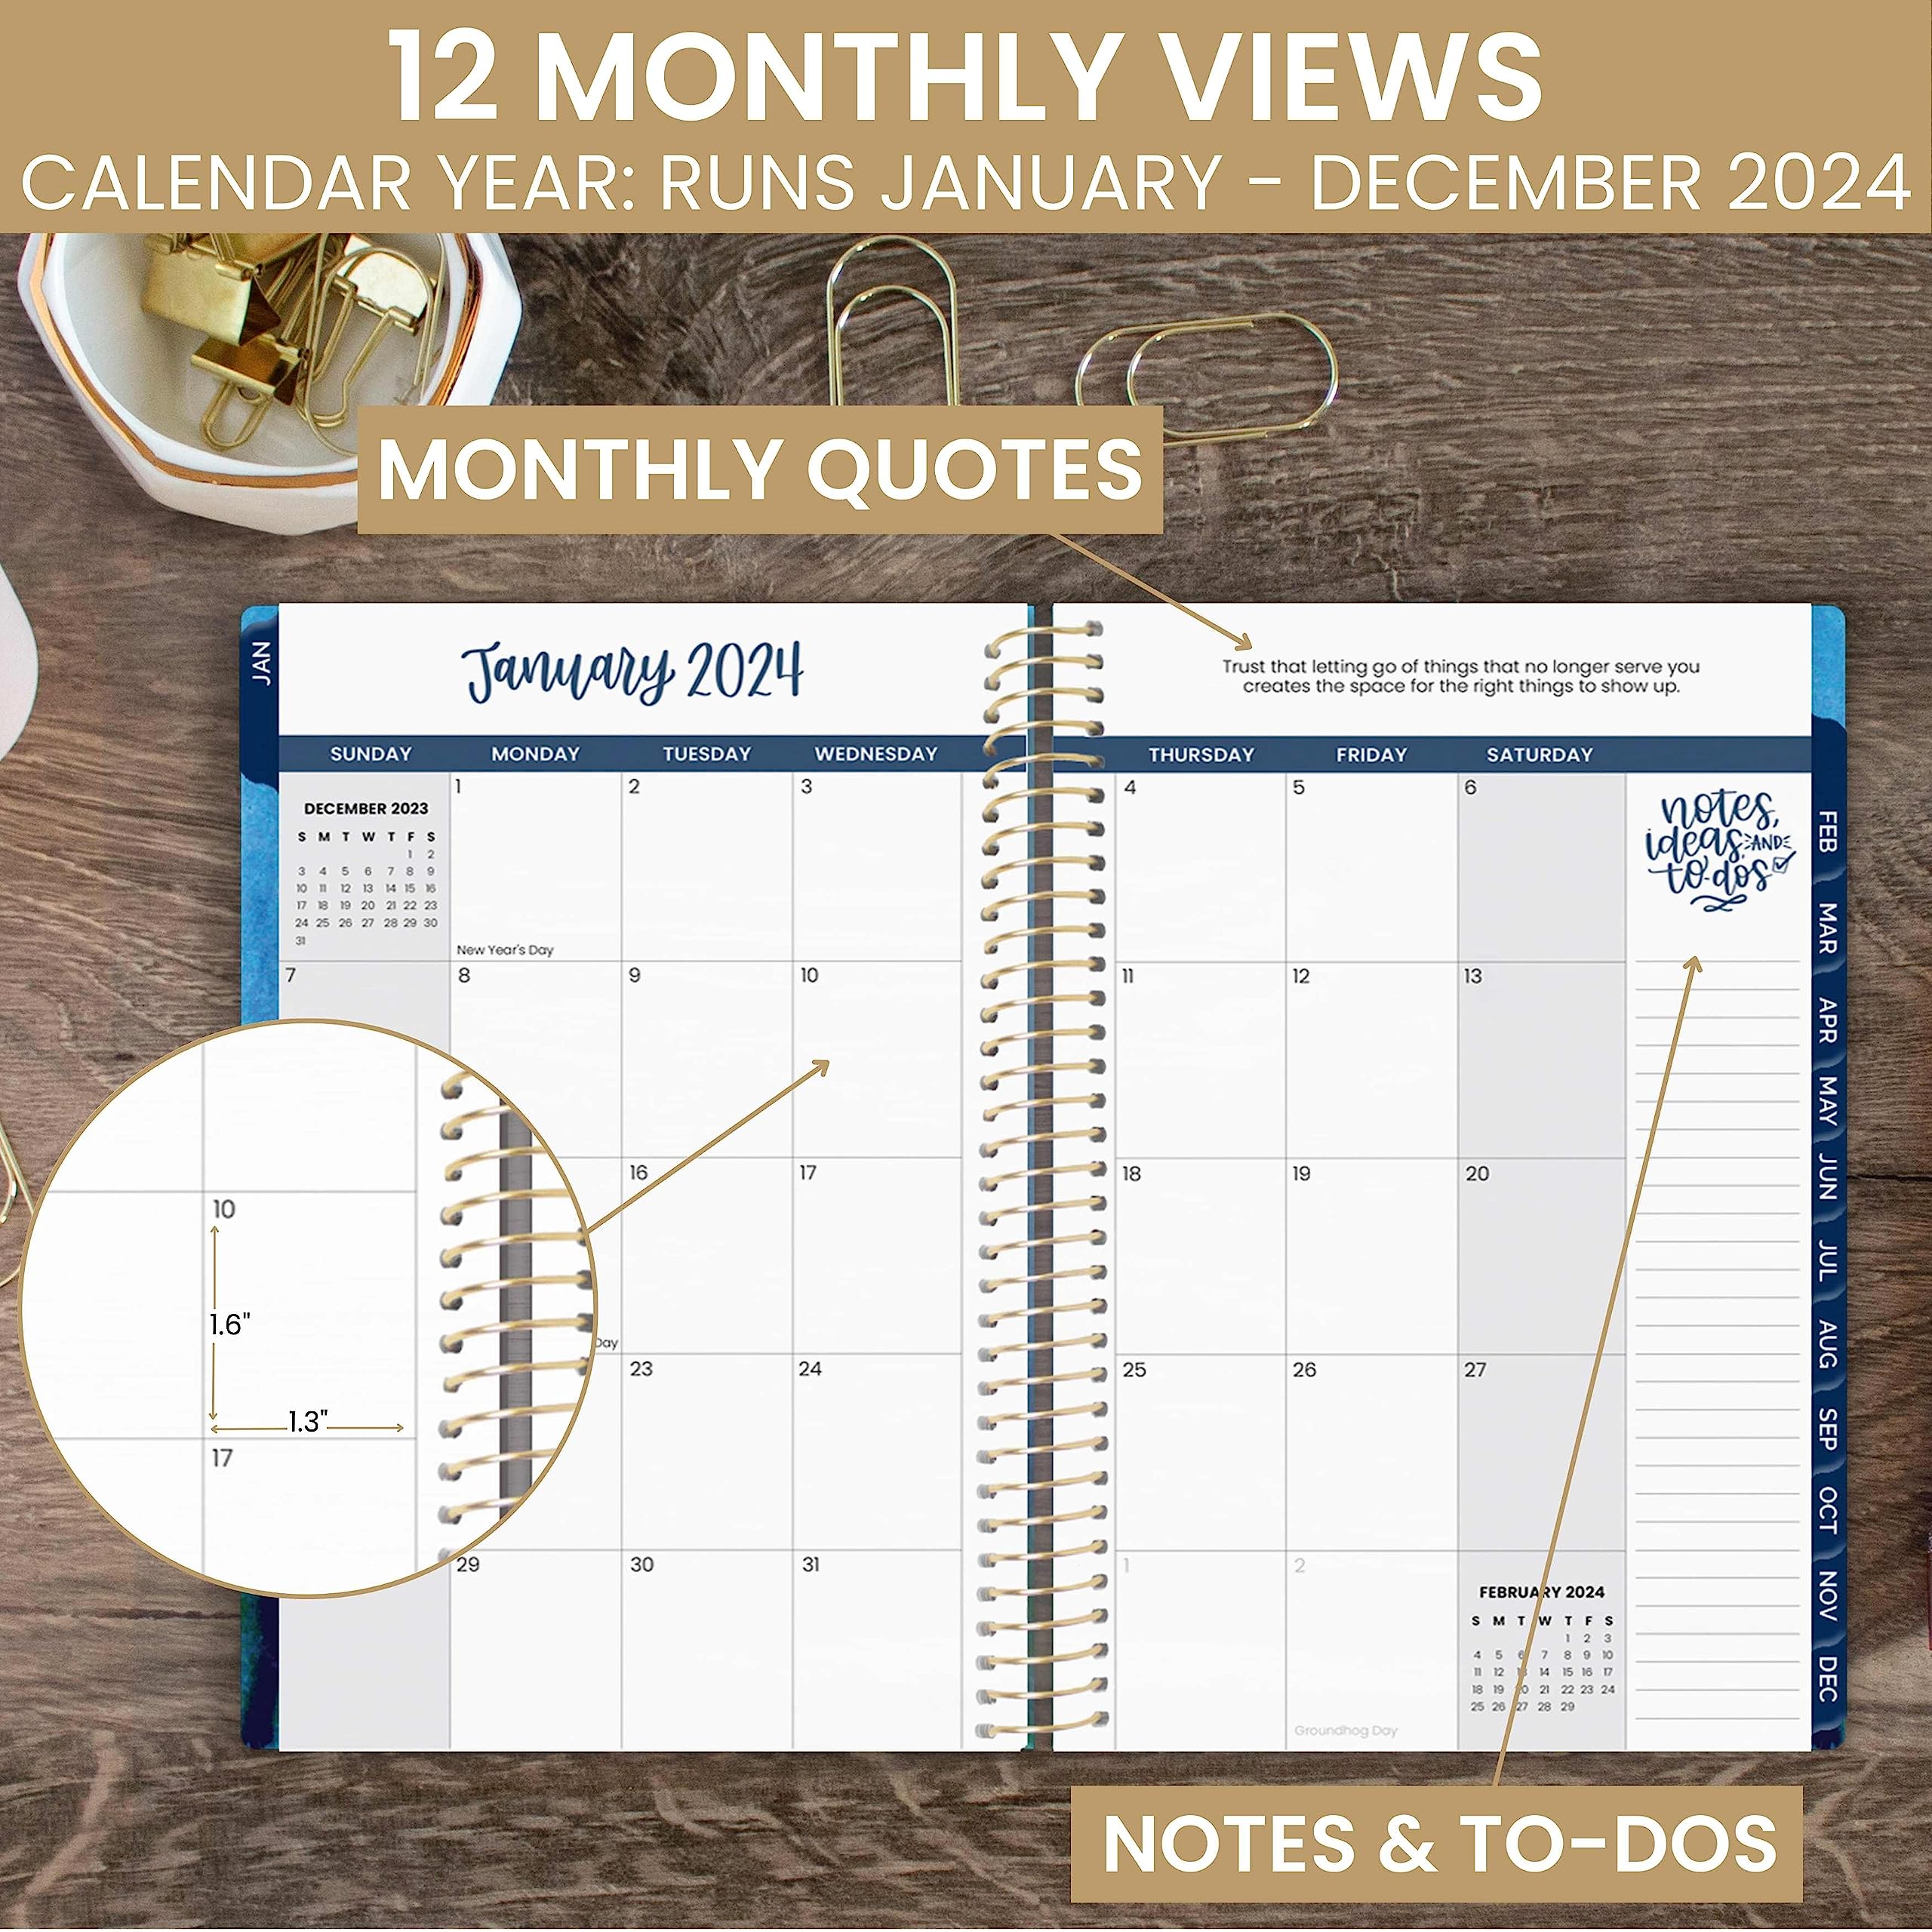 bloom daily planners 2024 Calendar Year Day Planner (January 2024 - December 2024) - 5.5” x 8.25” - Weekly/Monthly Agenda Organizer Book with Stickers & Bookmark - Blue Kintsugi